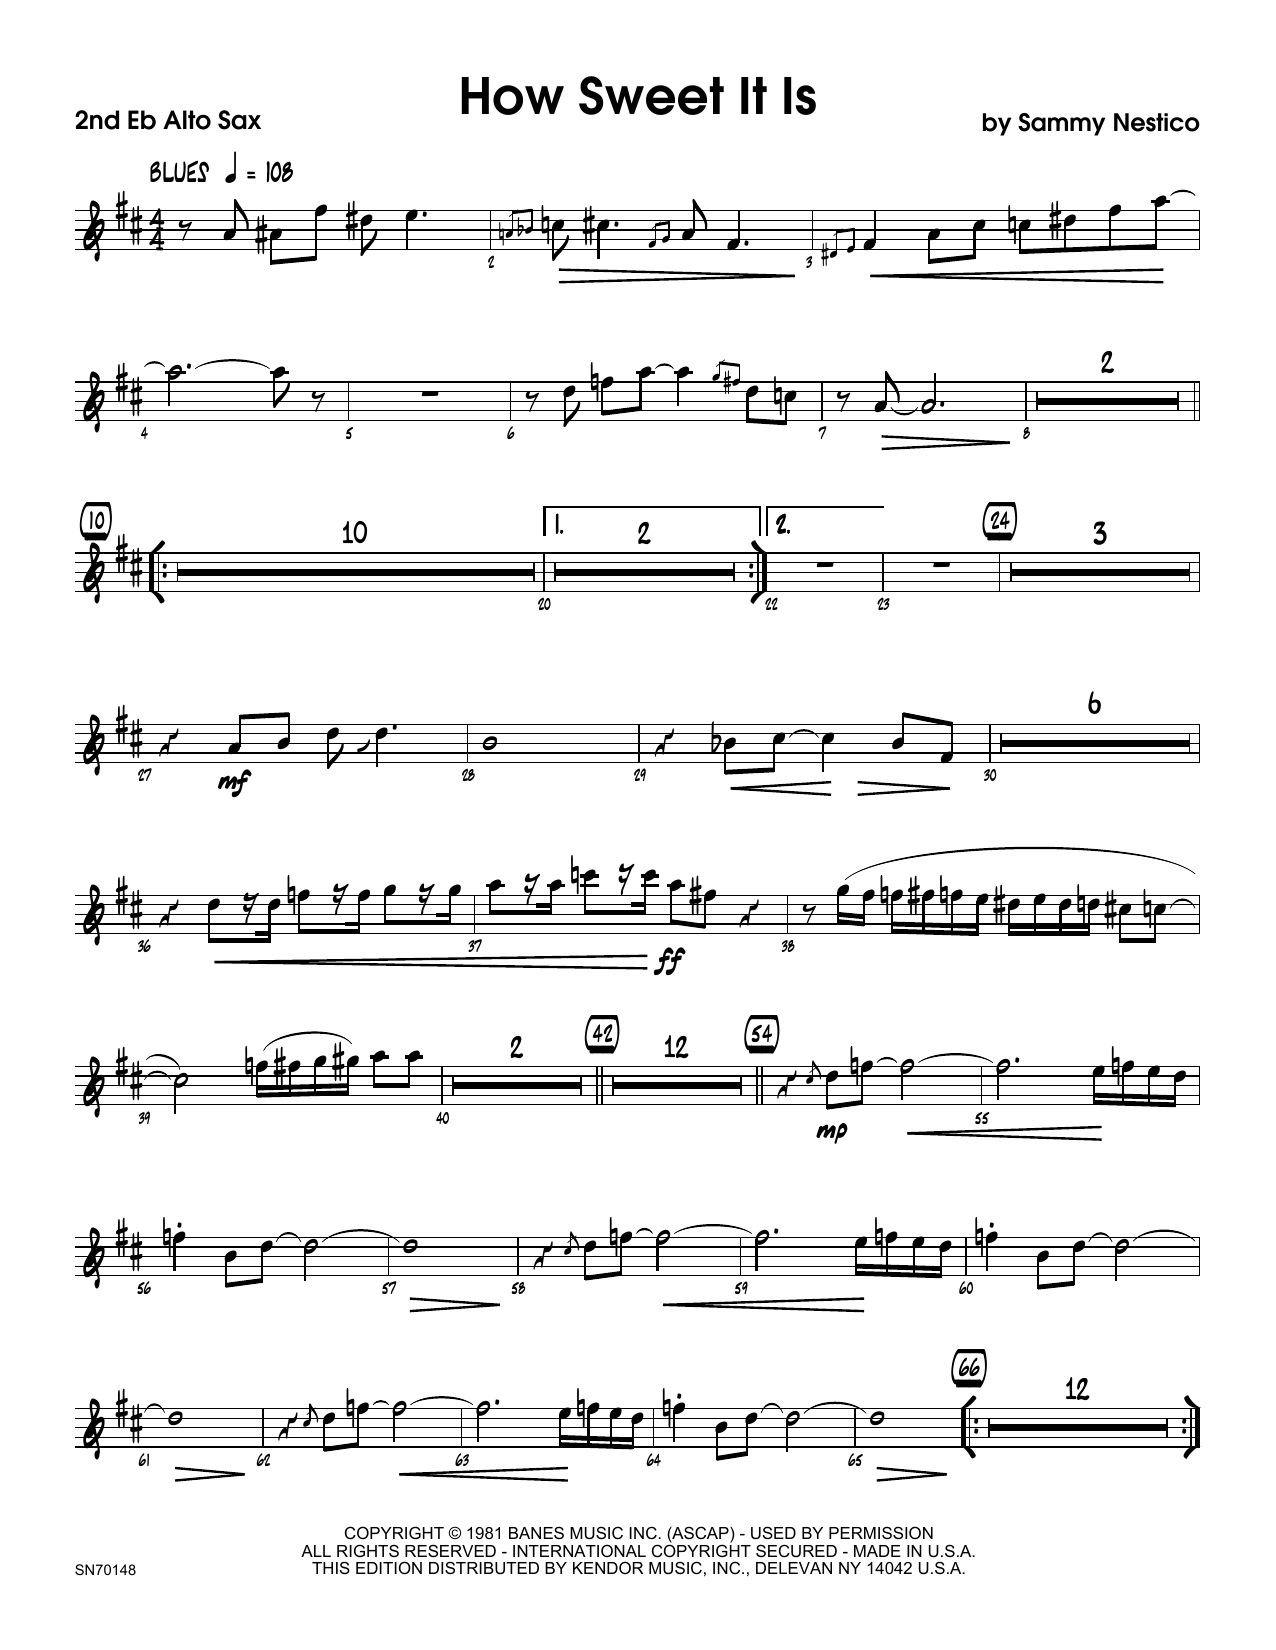 Download Sammy Nestico How Sweet It Is - 2nd Eb Alto Saxophone Sheet Music